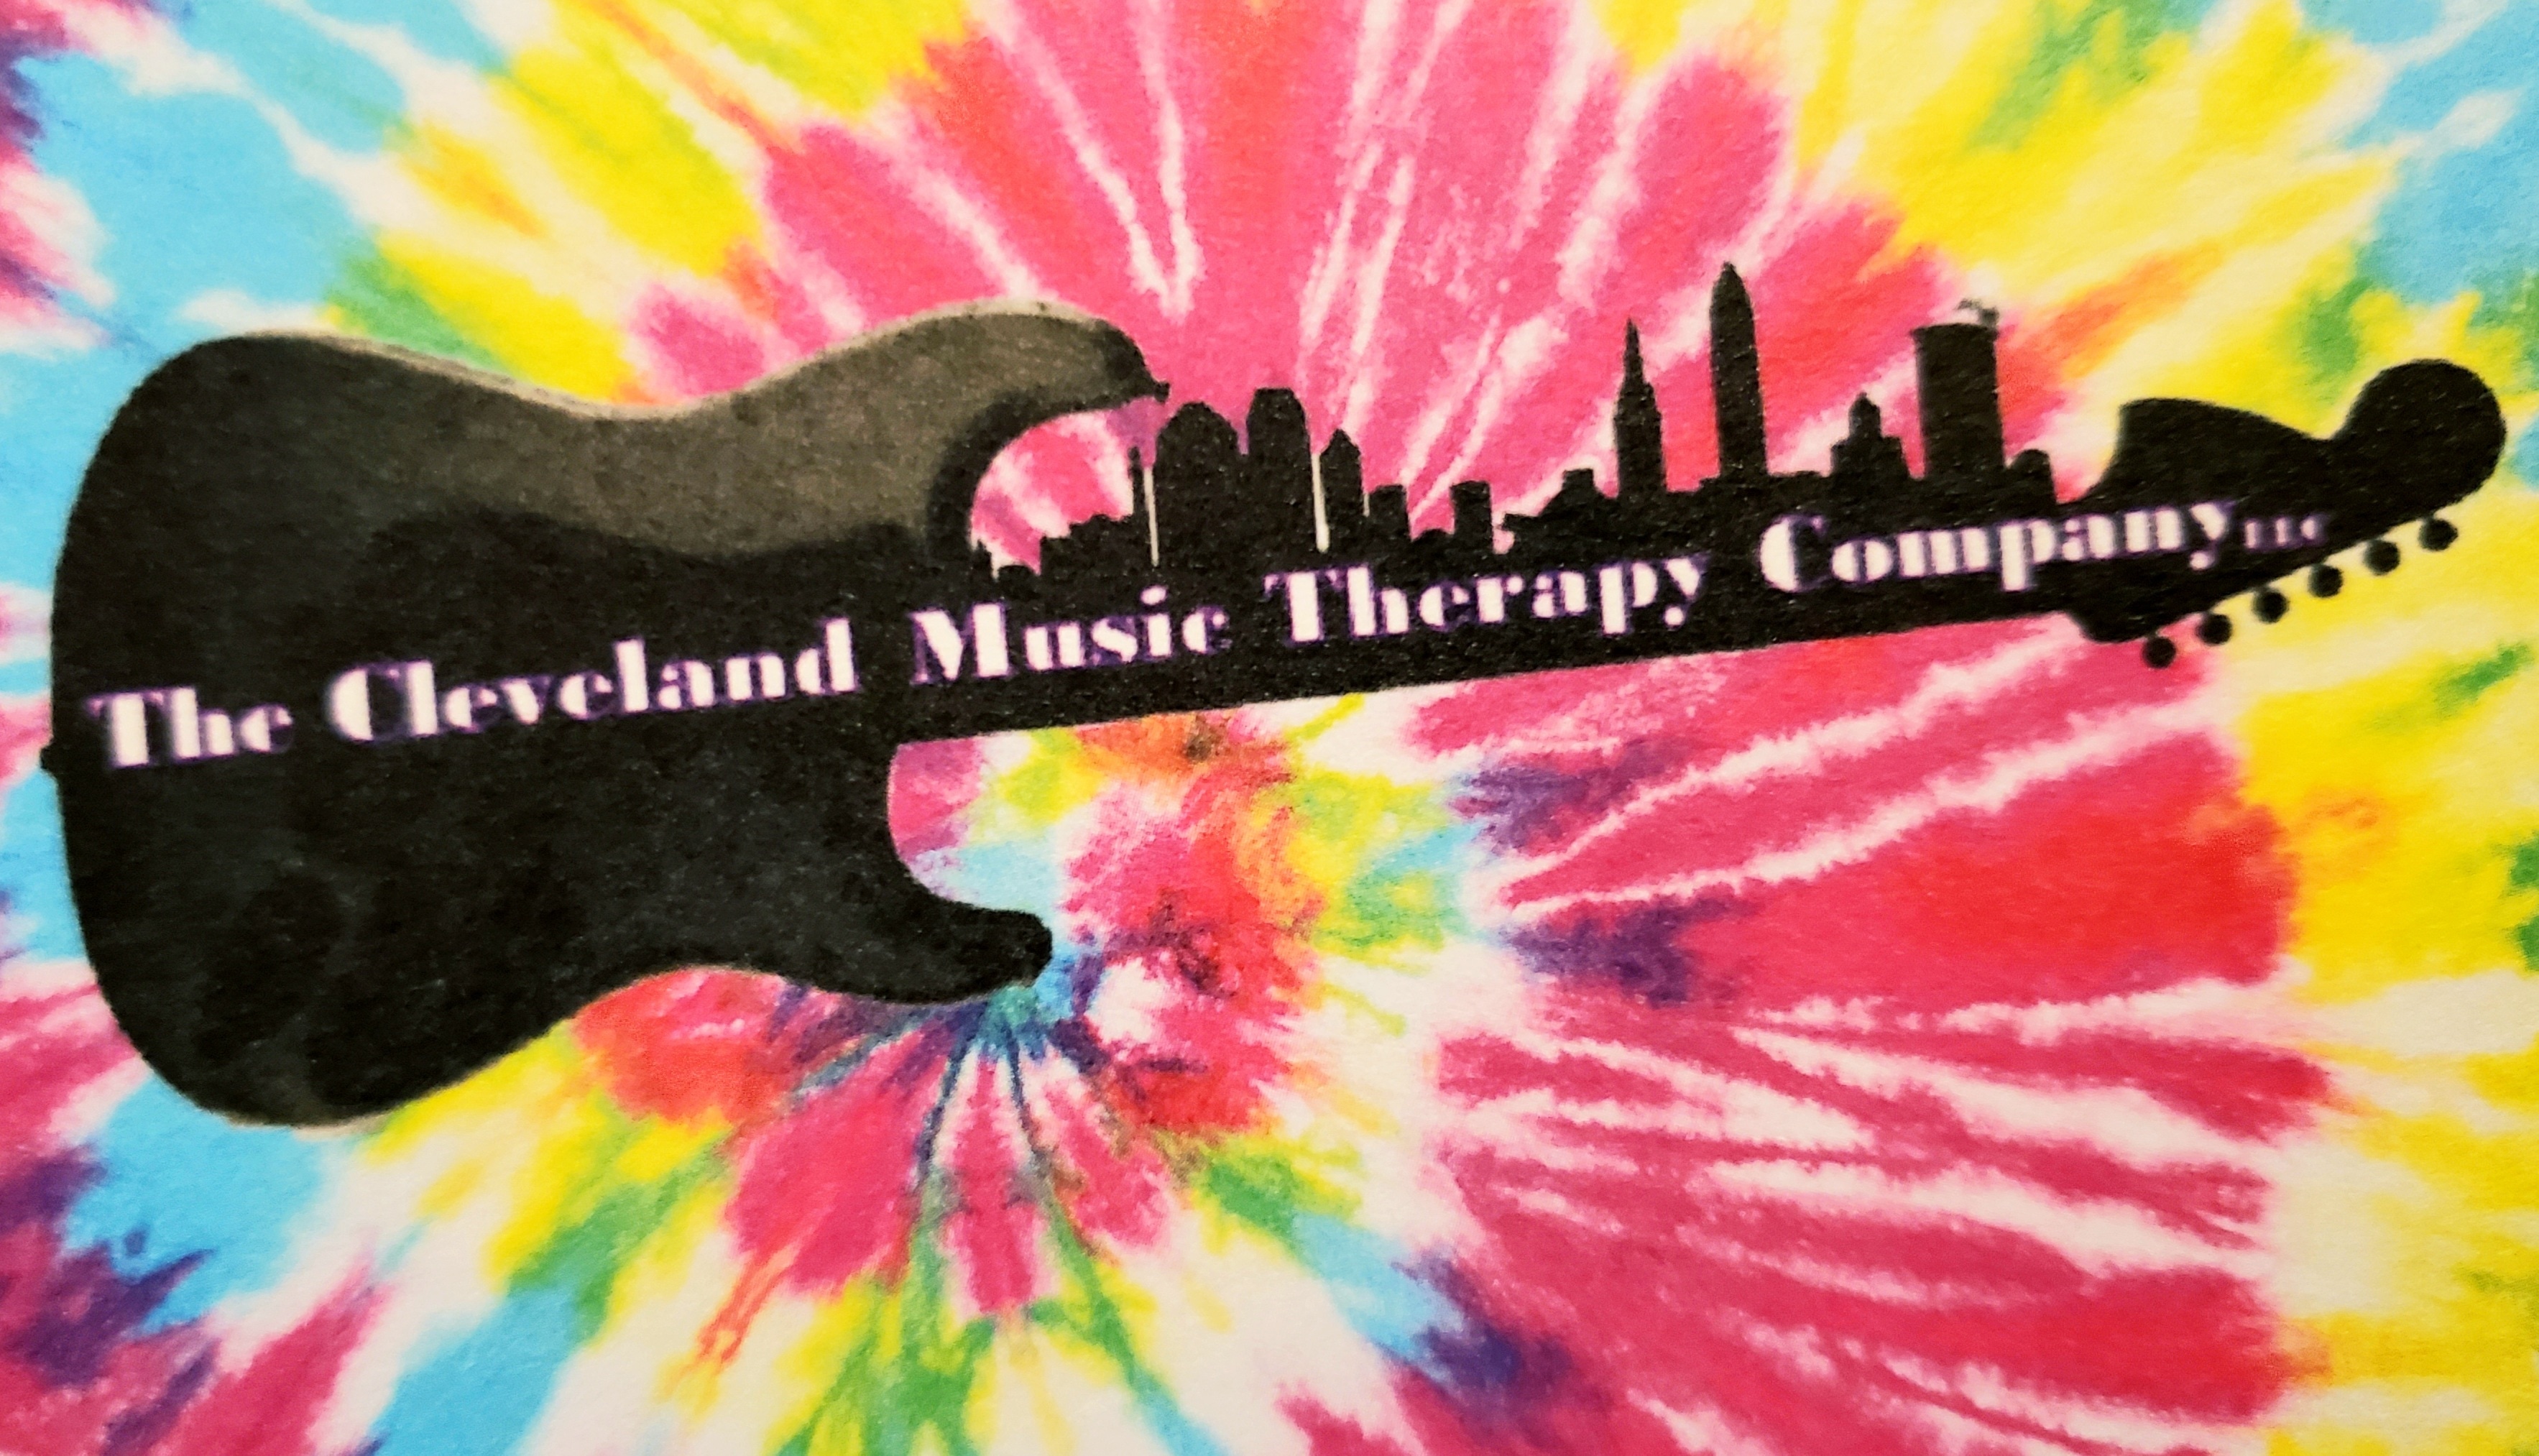 The Cleveland Music Therapy Company logo